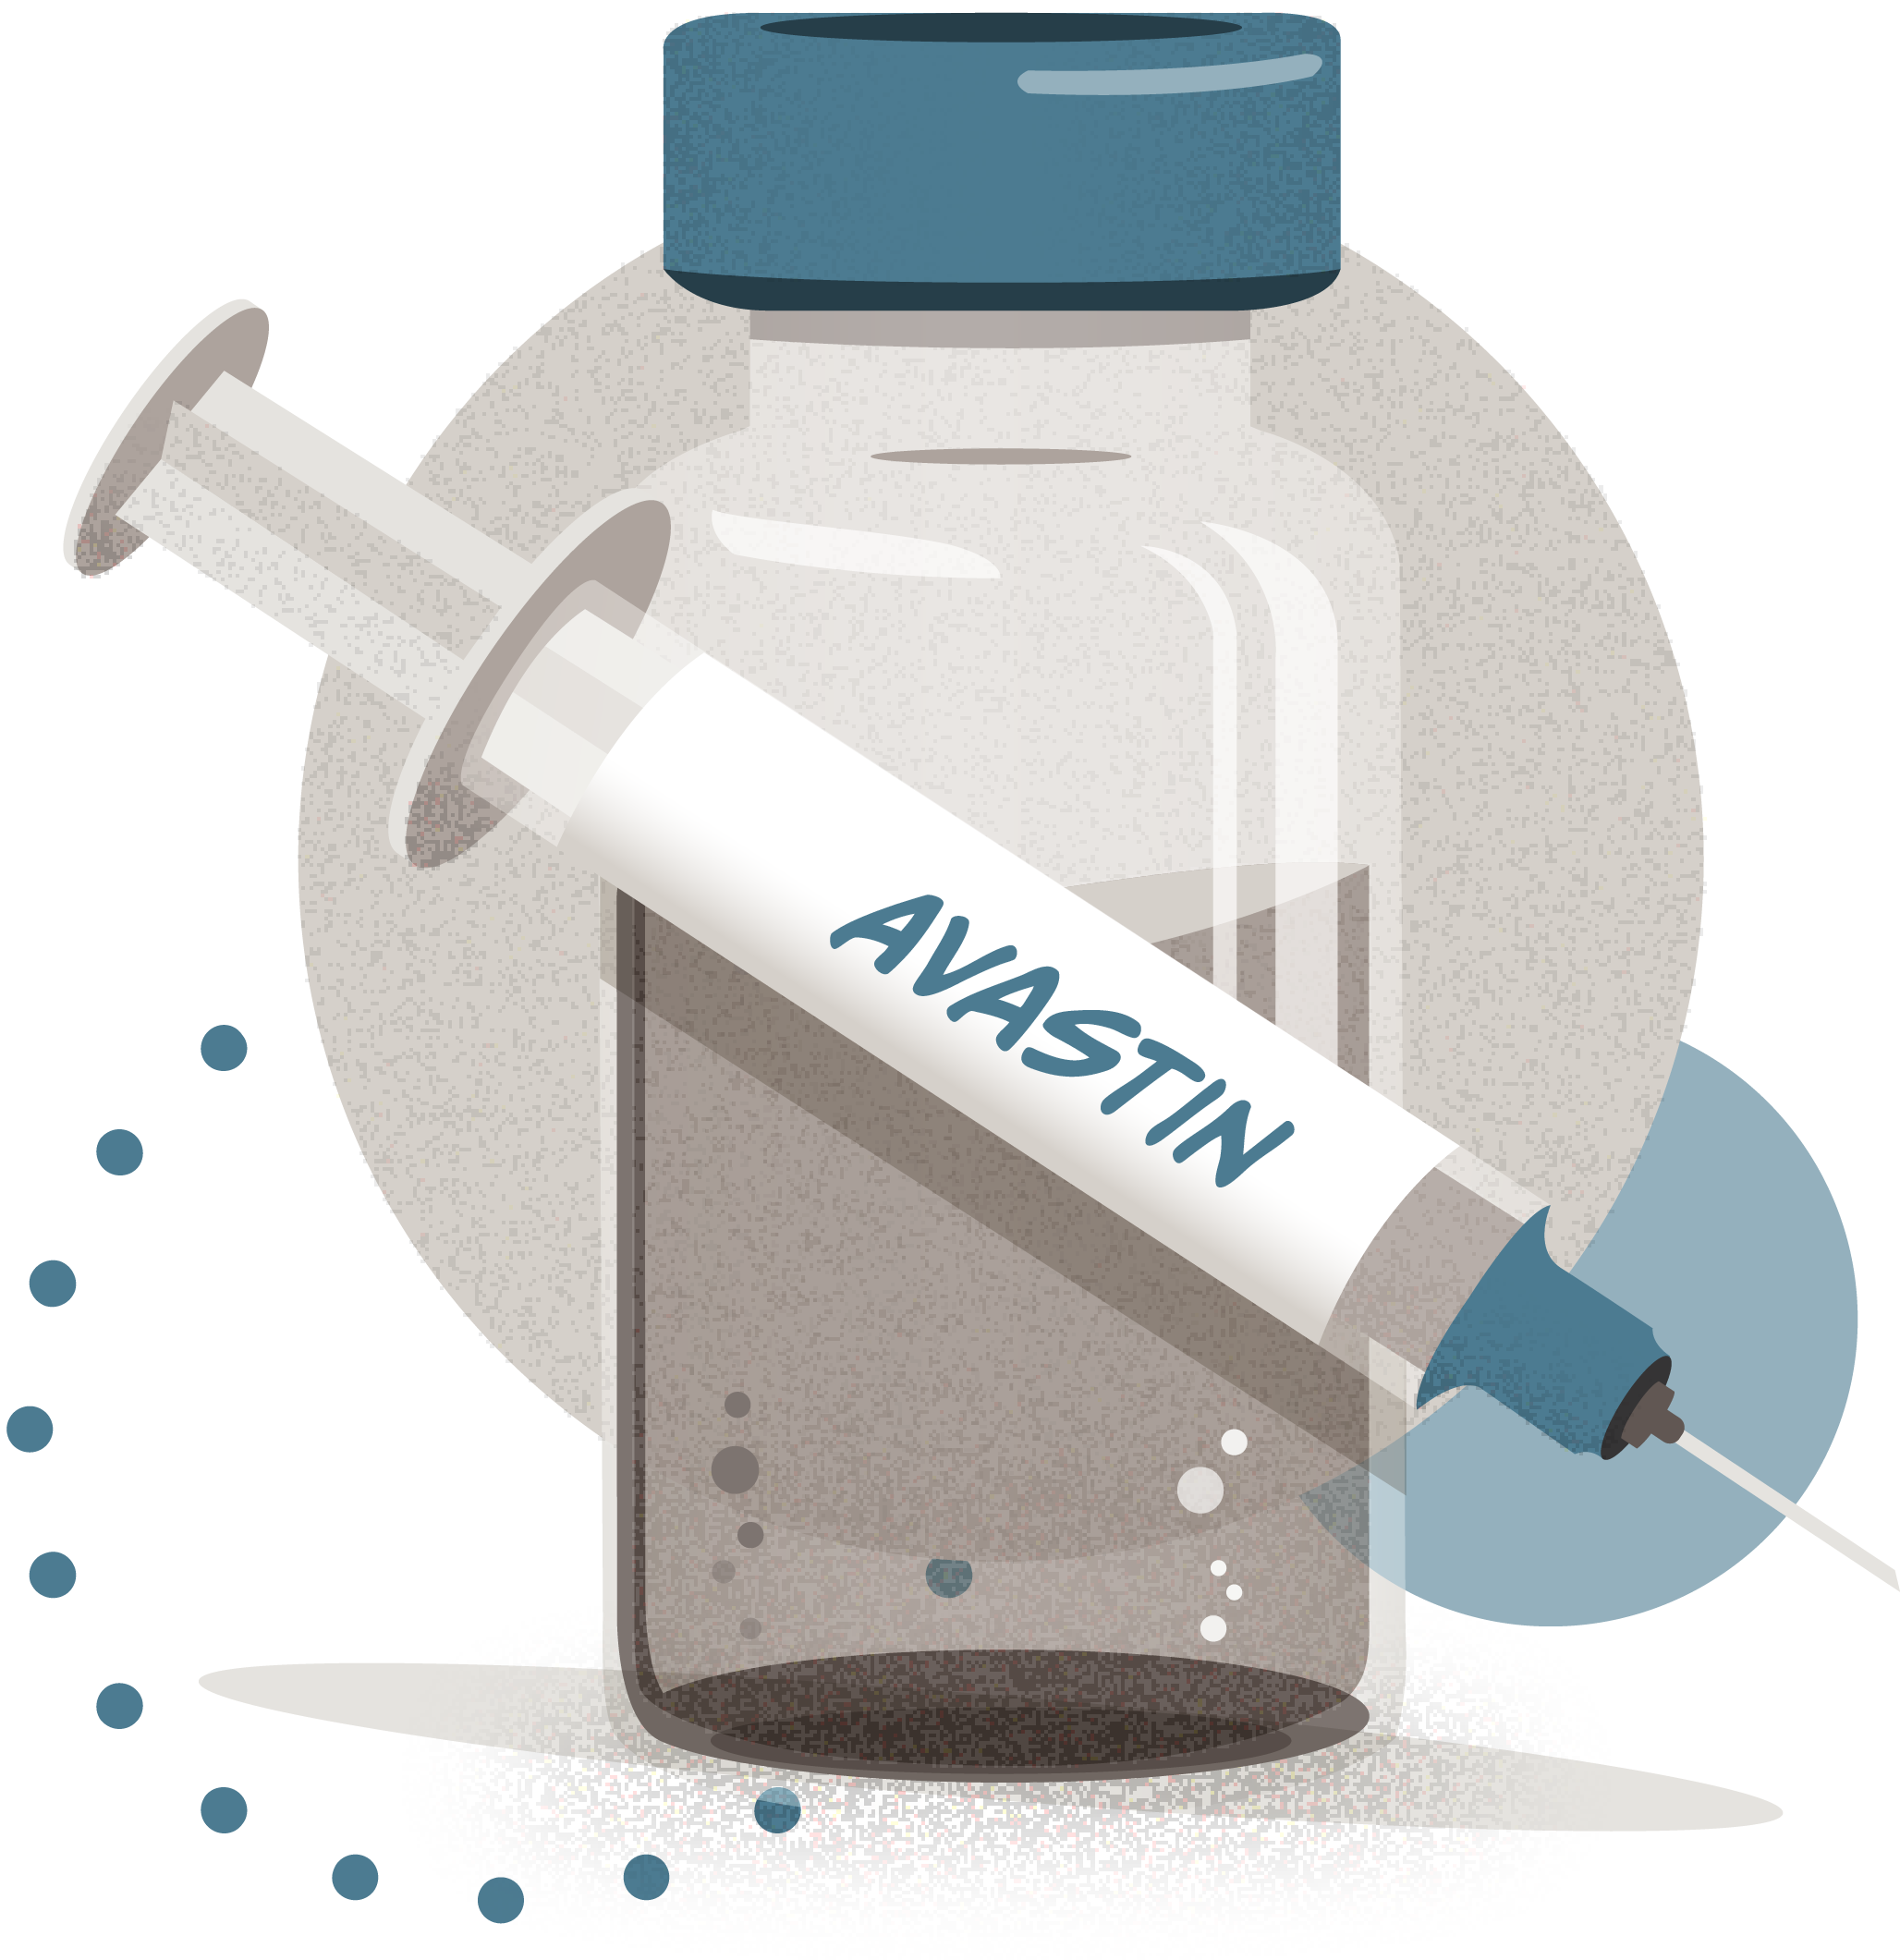 Illustration of a syringe and vial of Avastin, a drug used to treat the eye condition, wet age-related macular degeneration, as an example of an off-label prescription.